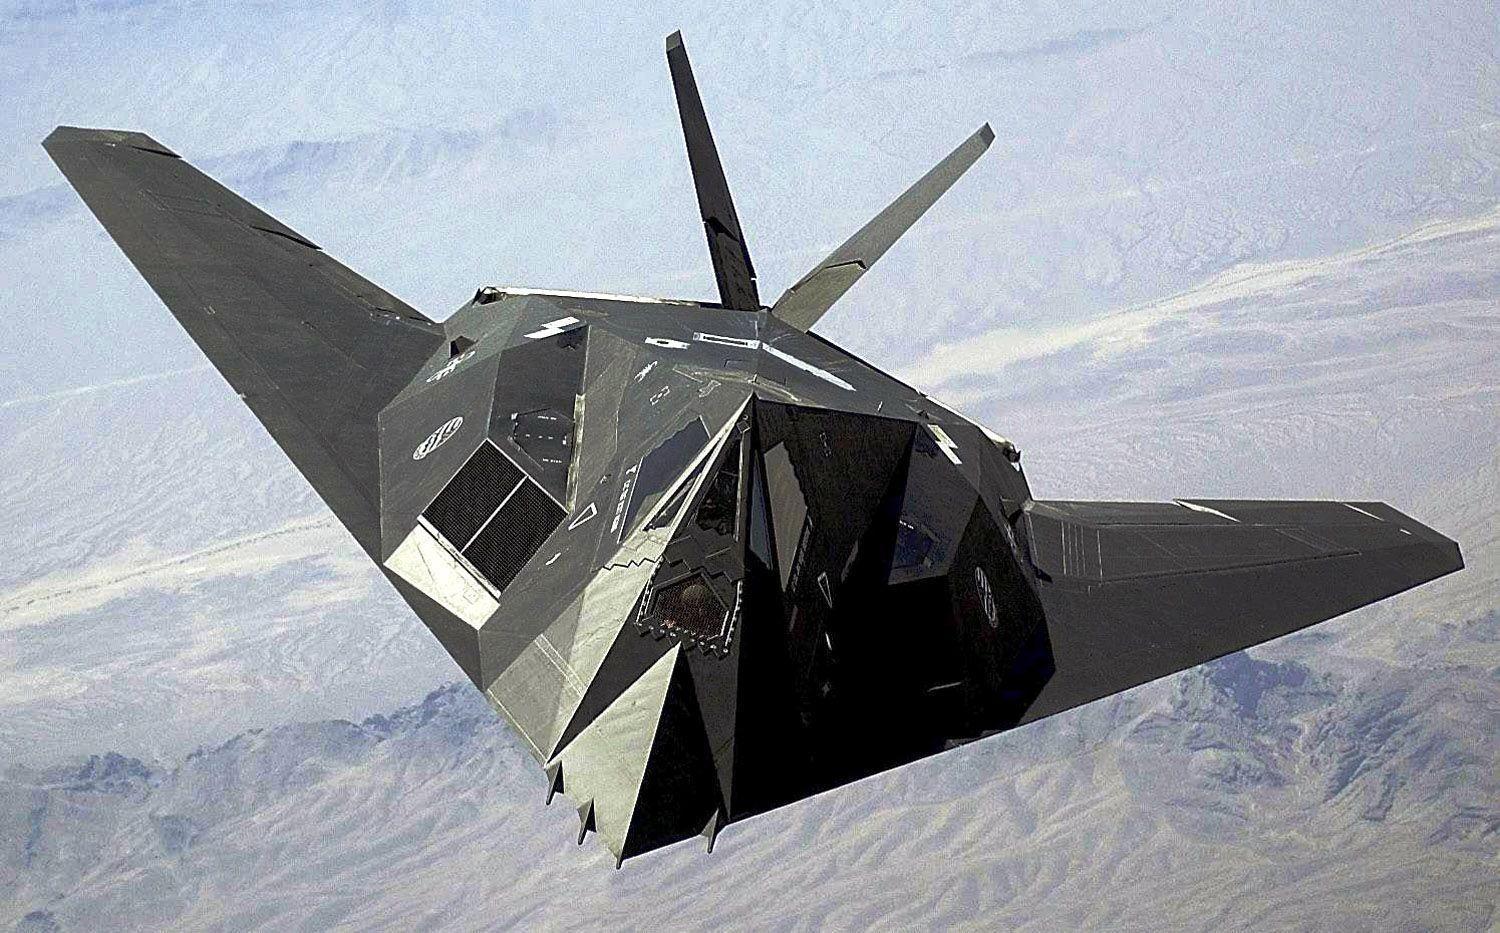 Nighthawk F 117a Stealth Fighter 2 0 Picture to pin